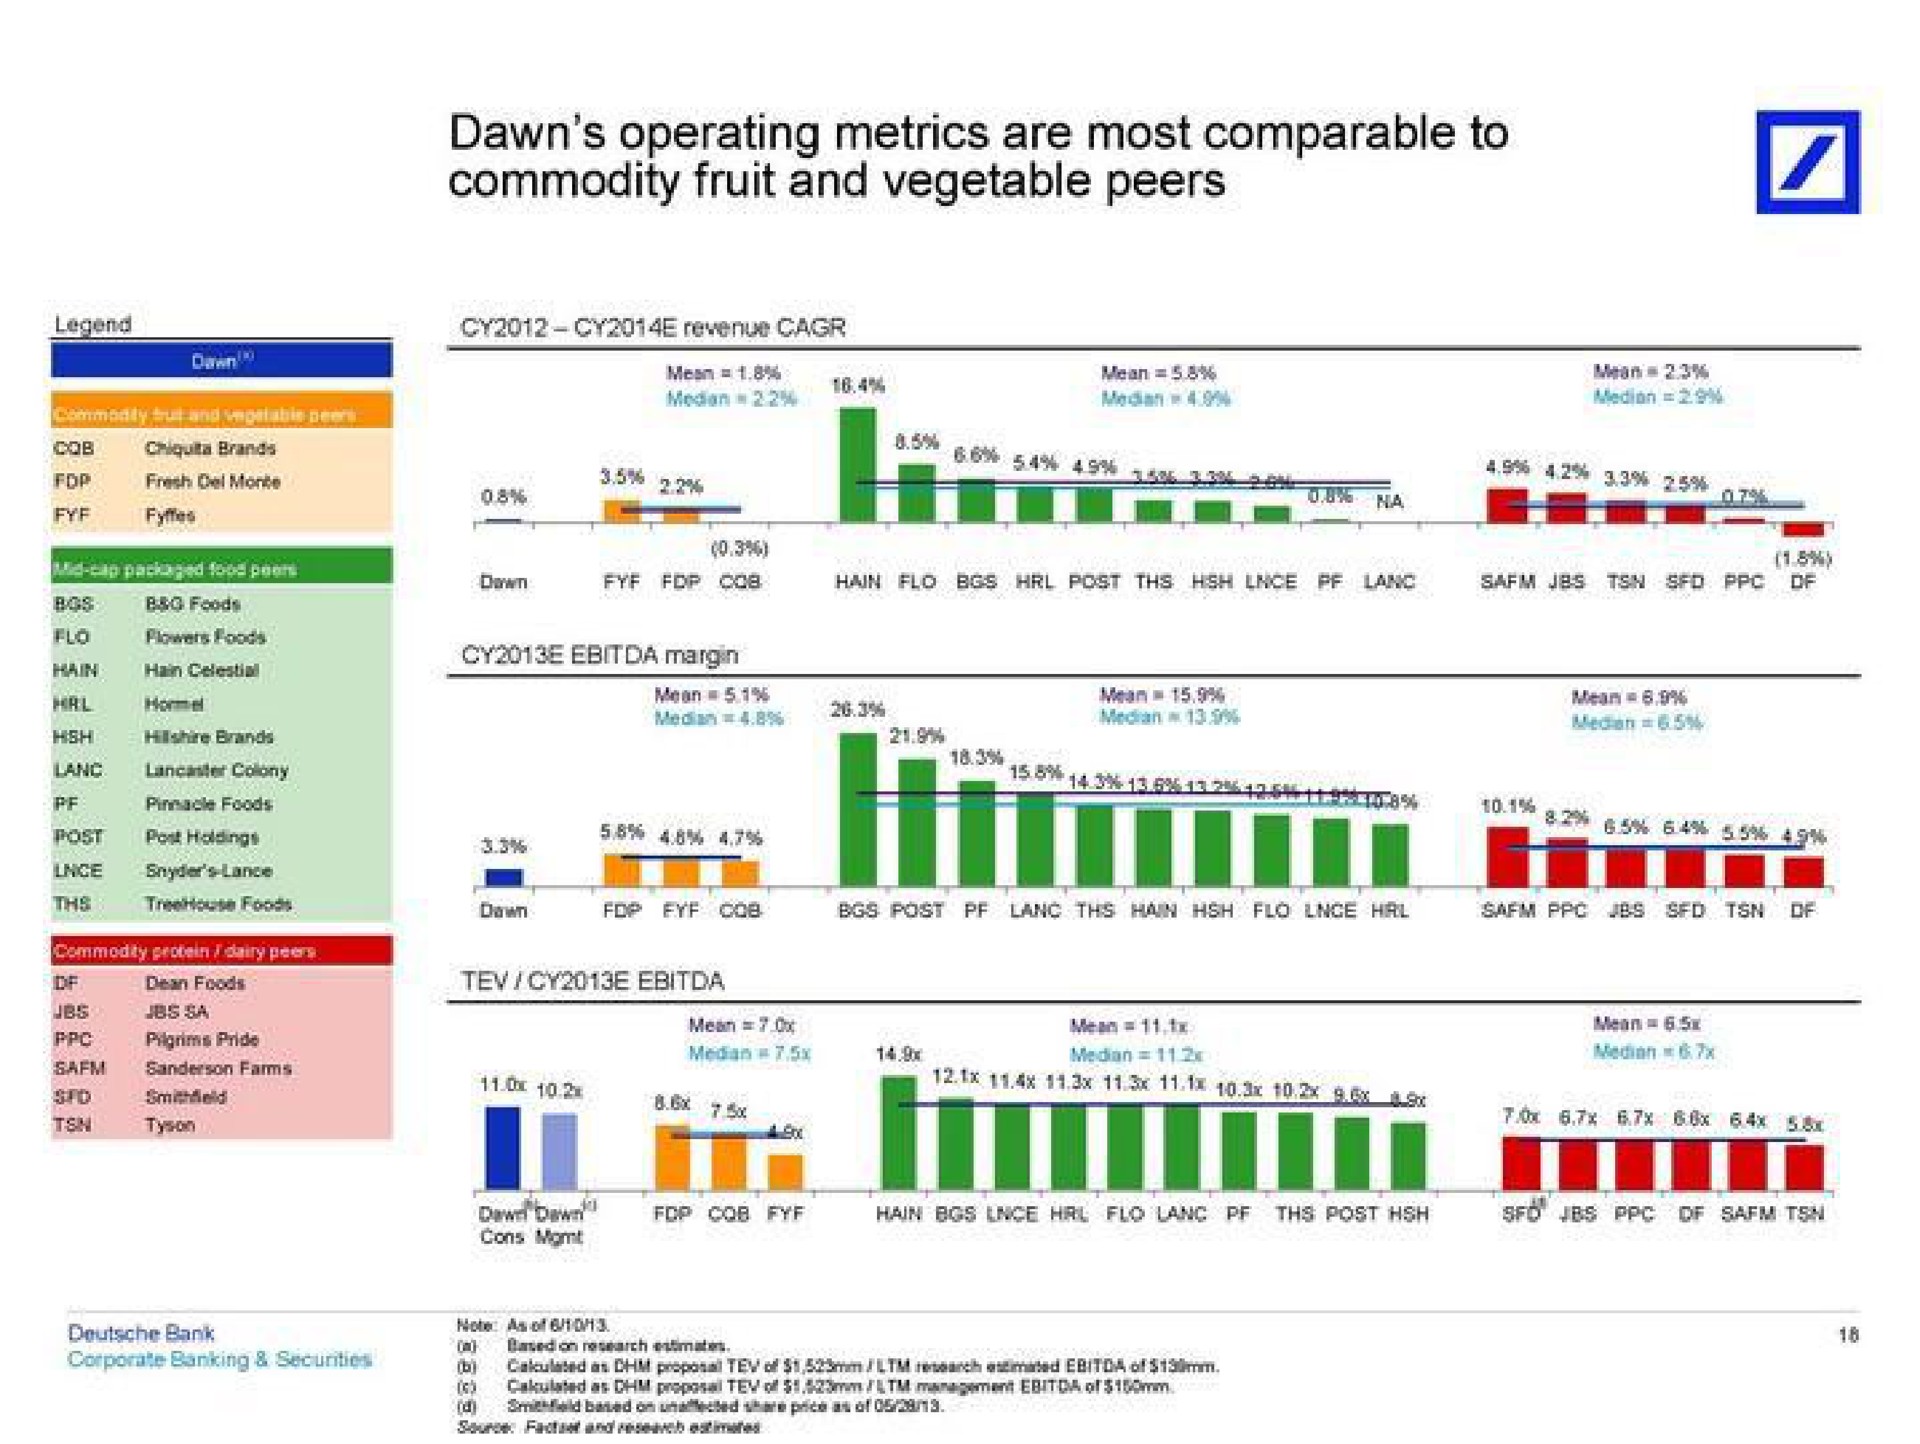 dawn operating metrics are most comparable to commodity fruit and vegetable peers | Deutsche Bank